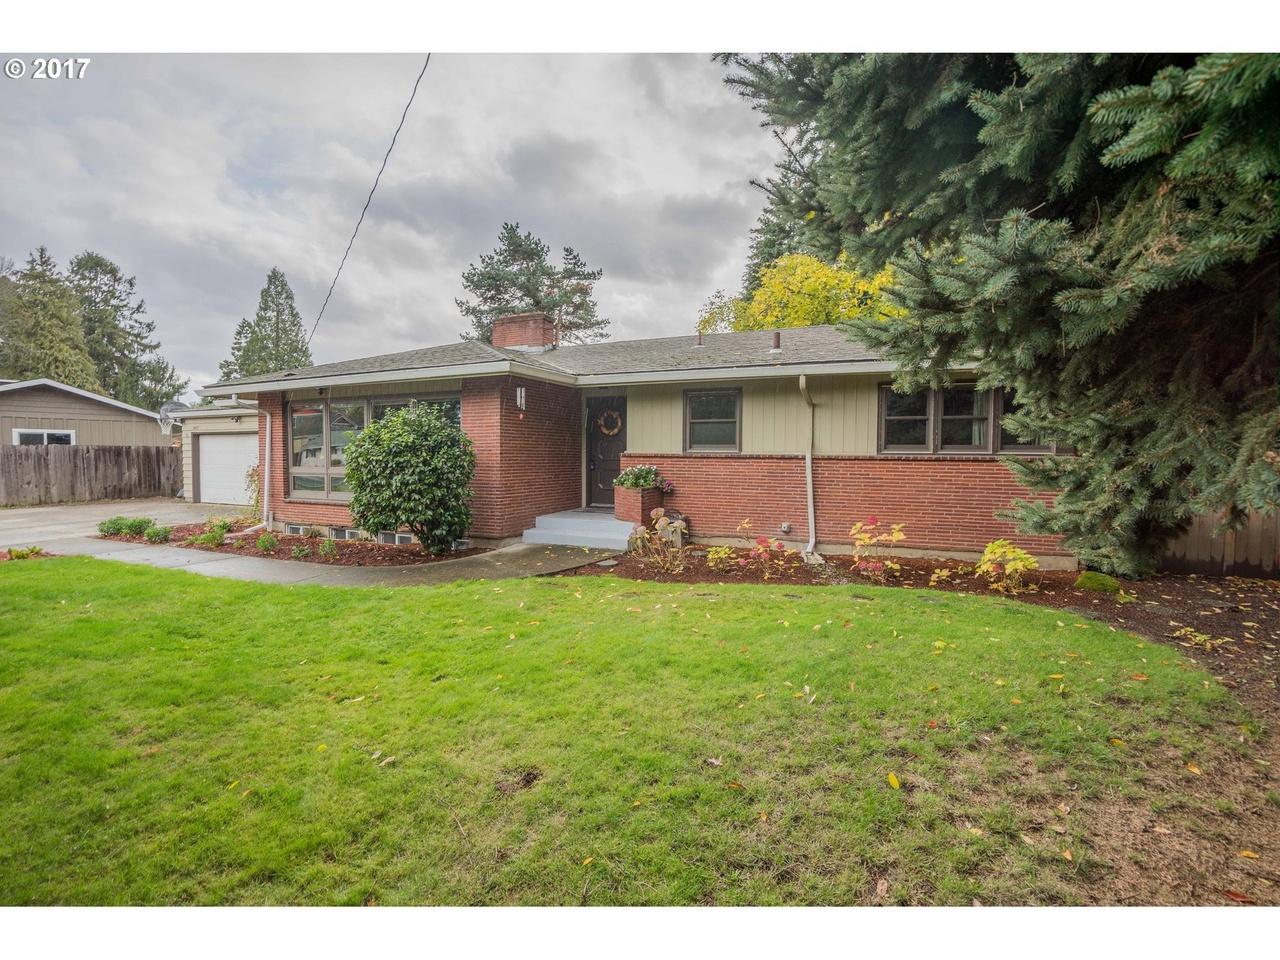 2417 NW 99th St, Vancouver, WA 98665 | MLS# 17412677 | Redfin